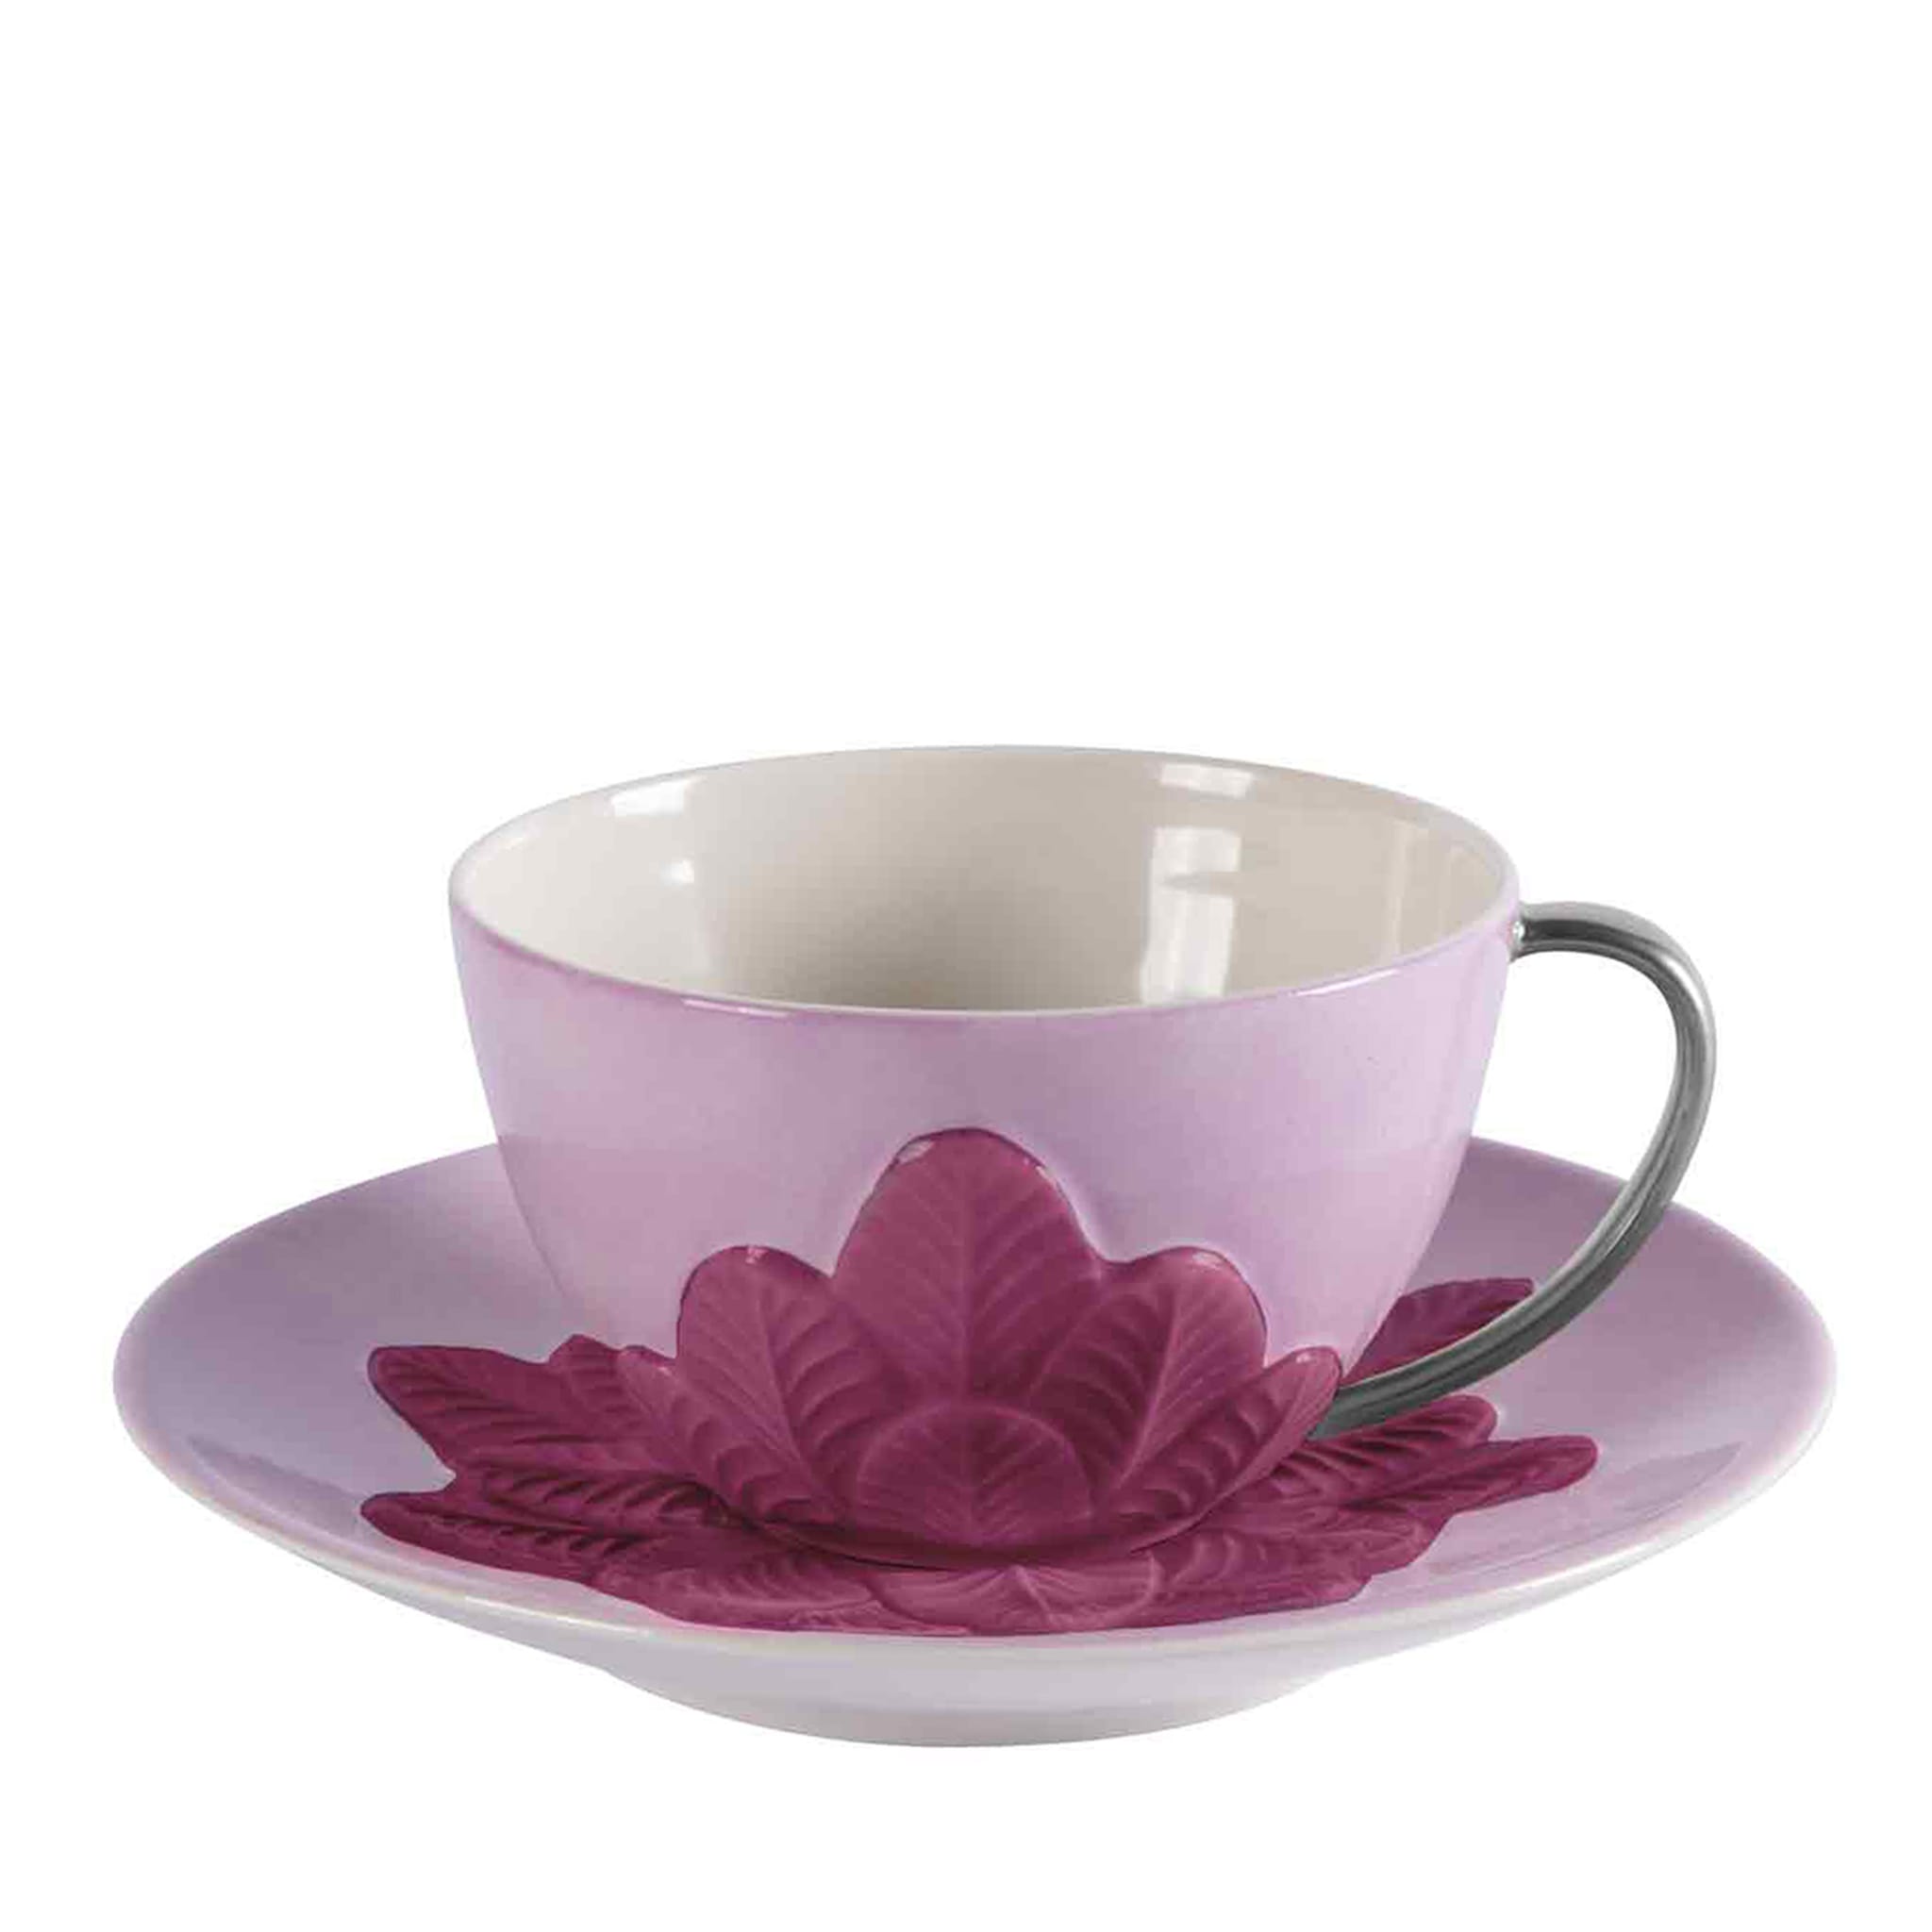 PEACOCK TEA CUP - PURPLE AND SILVER - Main view